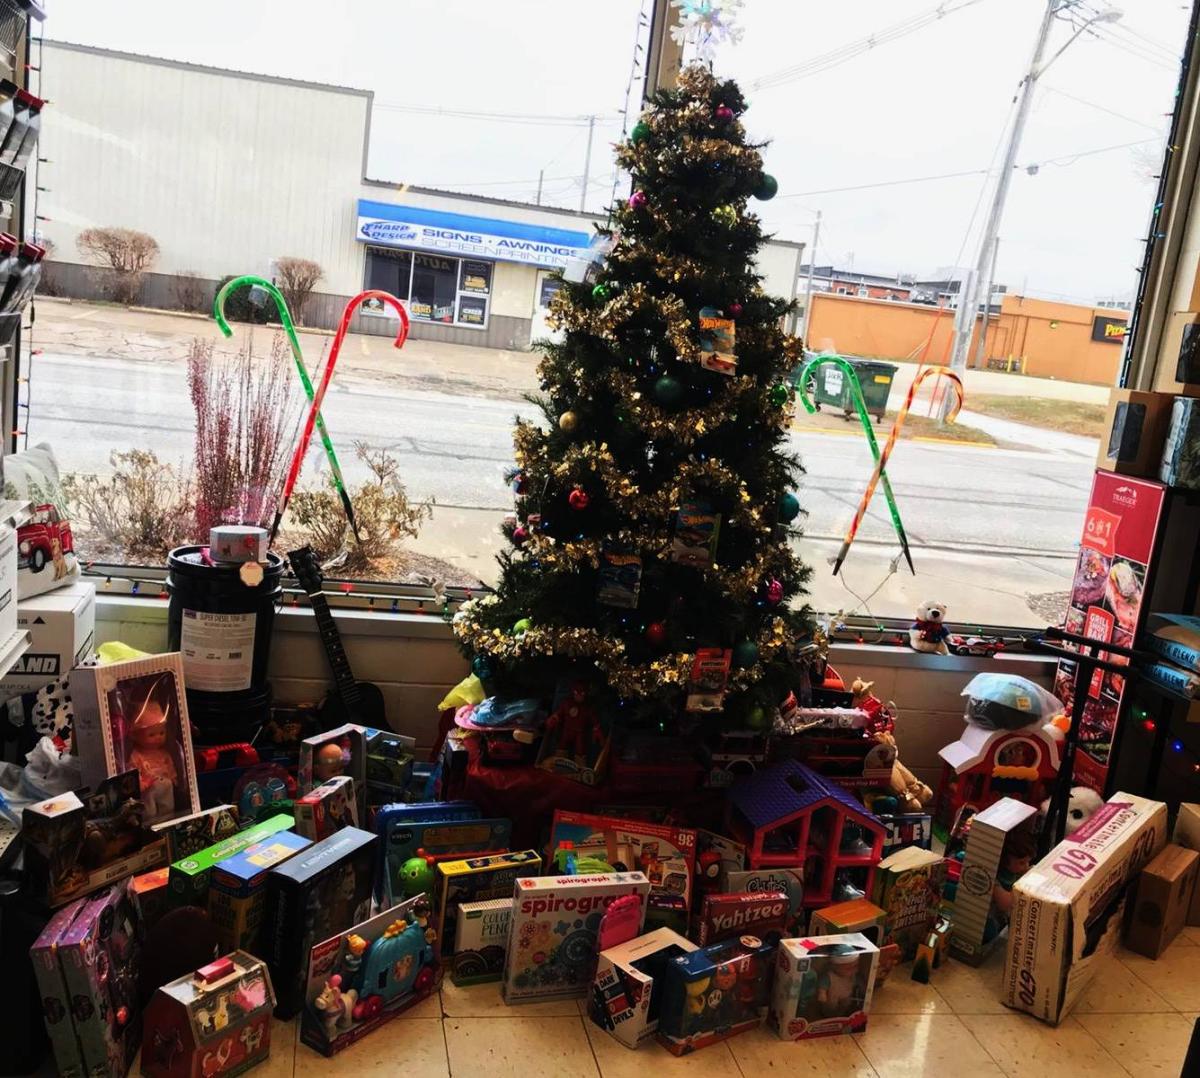 Arnold Motor Supply's toy collection ends Tuesday, December 13